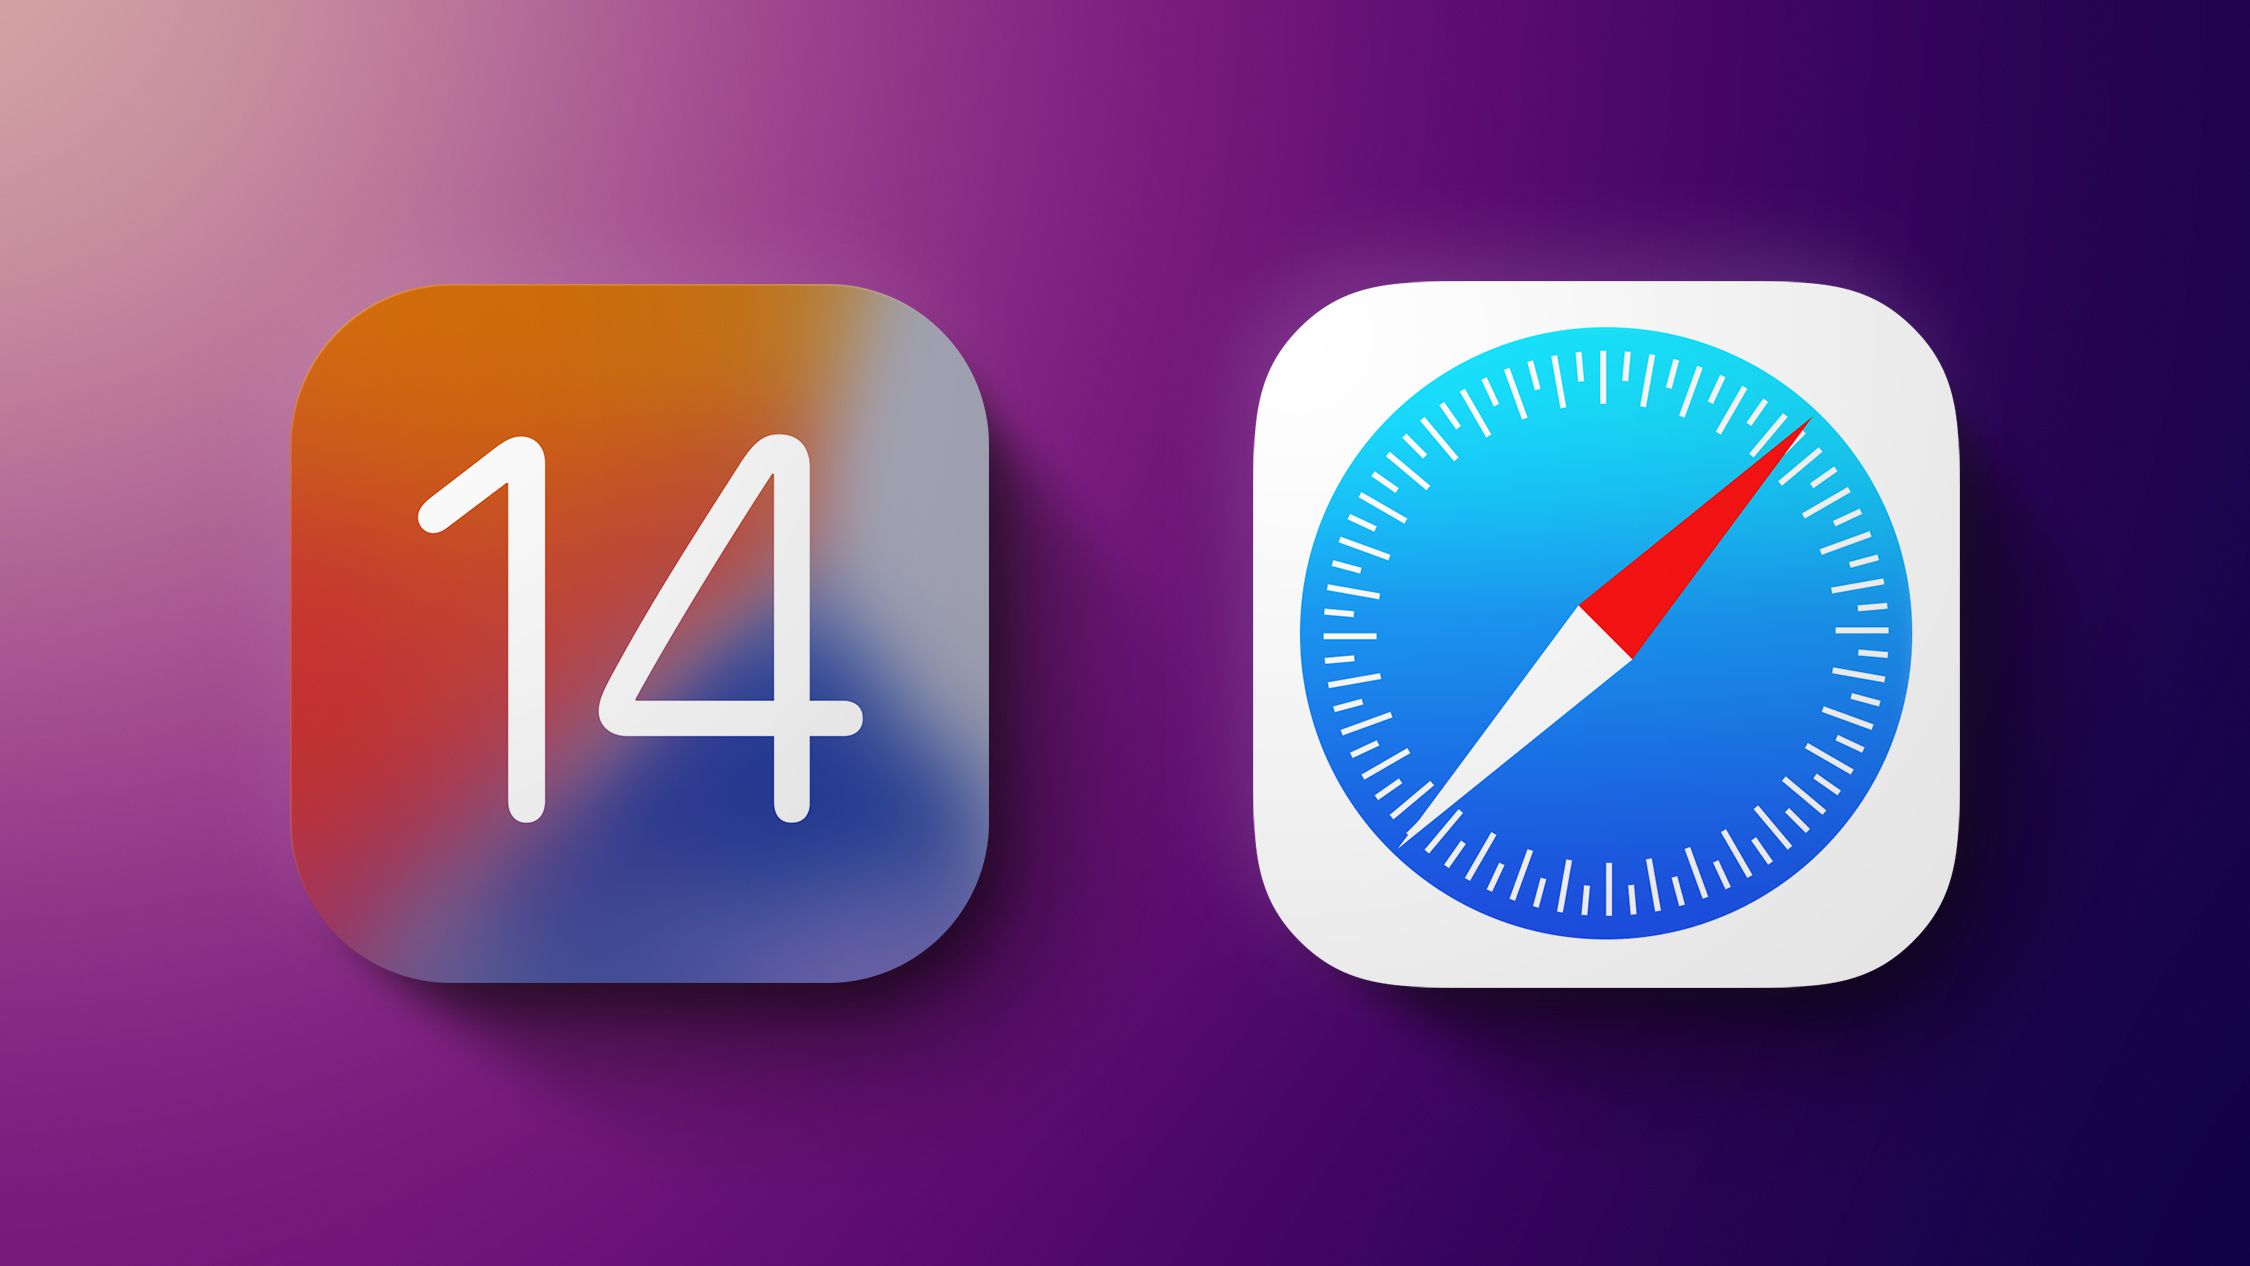 iOS 14.5 Beta directs ‘safe browsing’ traffic on Safari through the Apple server instead of Google to protect the user’s personal data